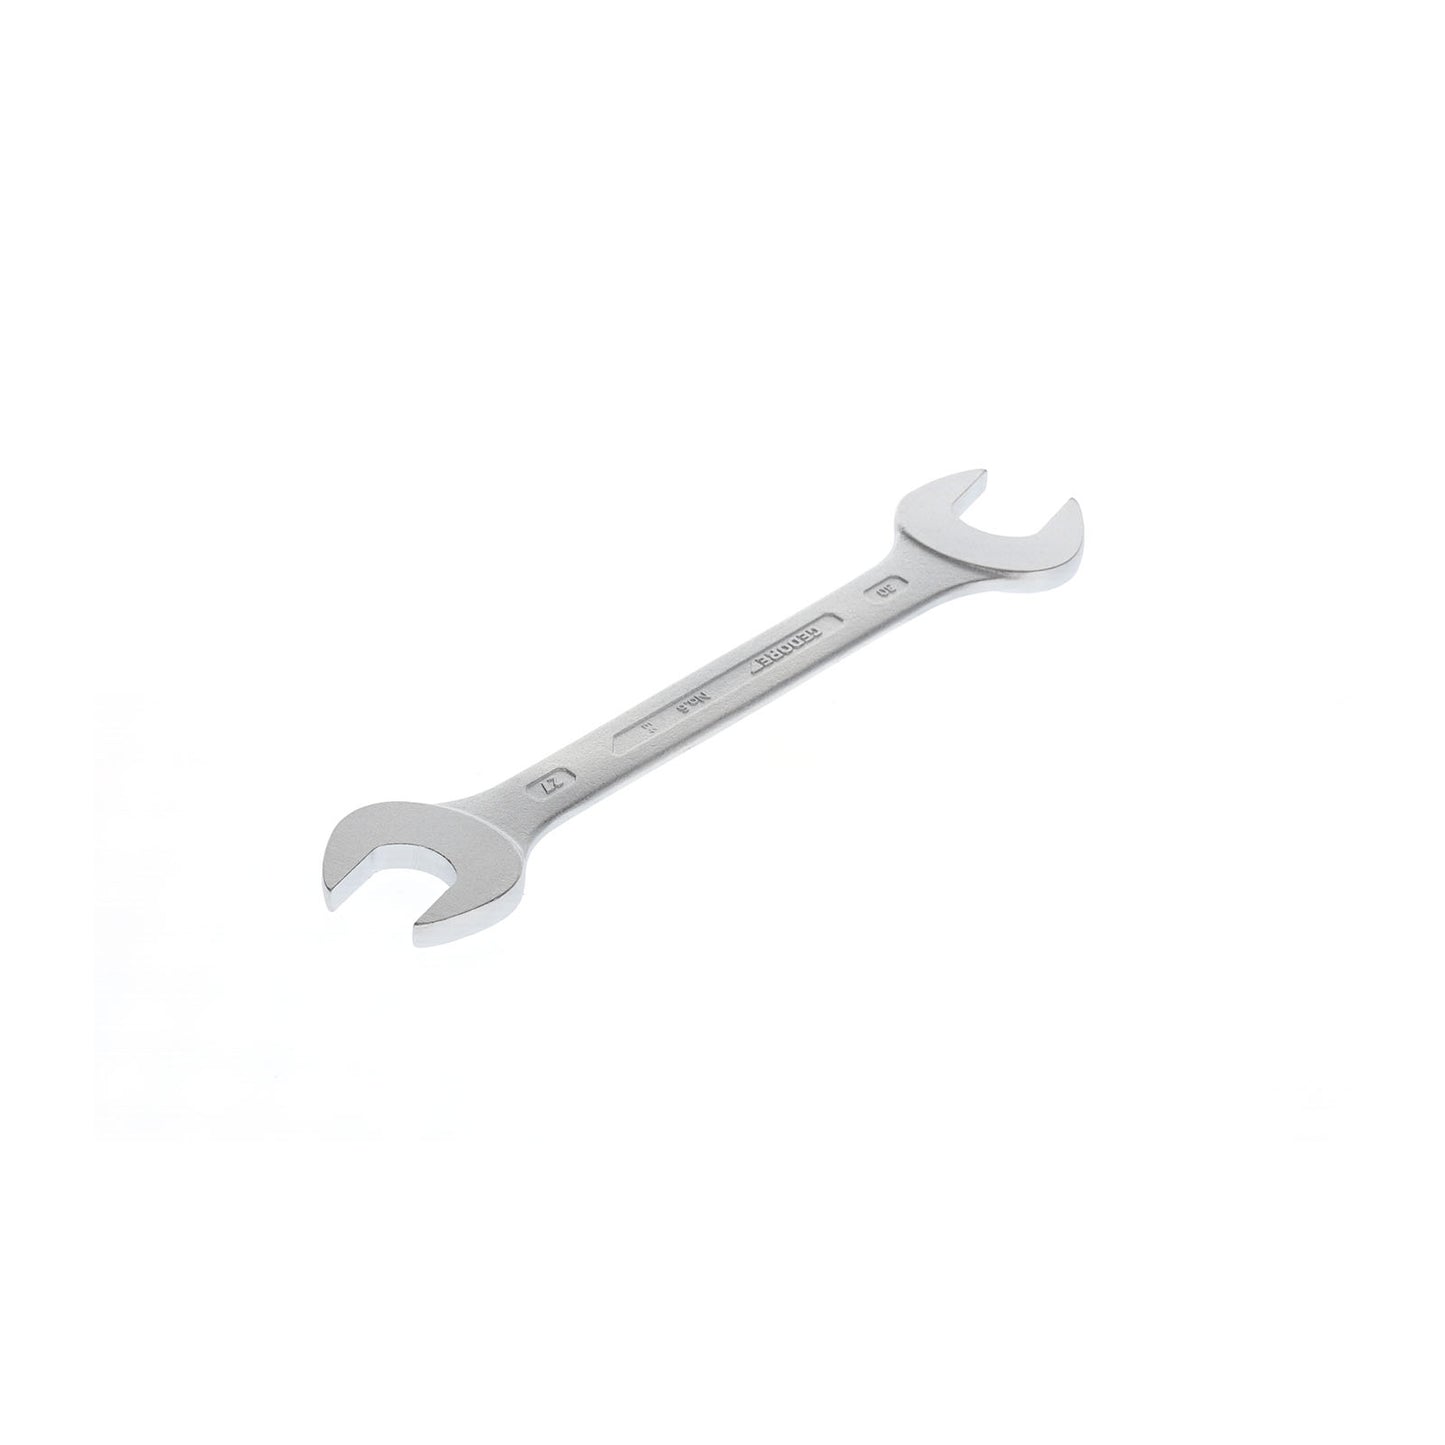 GEDORE 6 27X30 - 2-Mount Fixed Wrench, 27x30 (6067900)